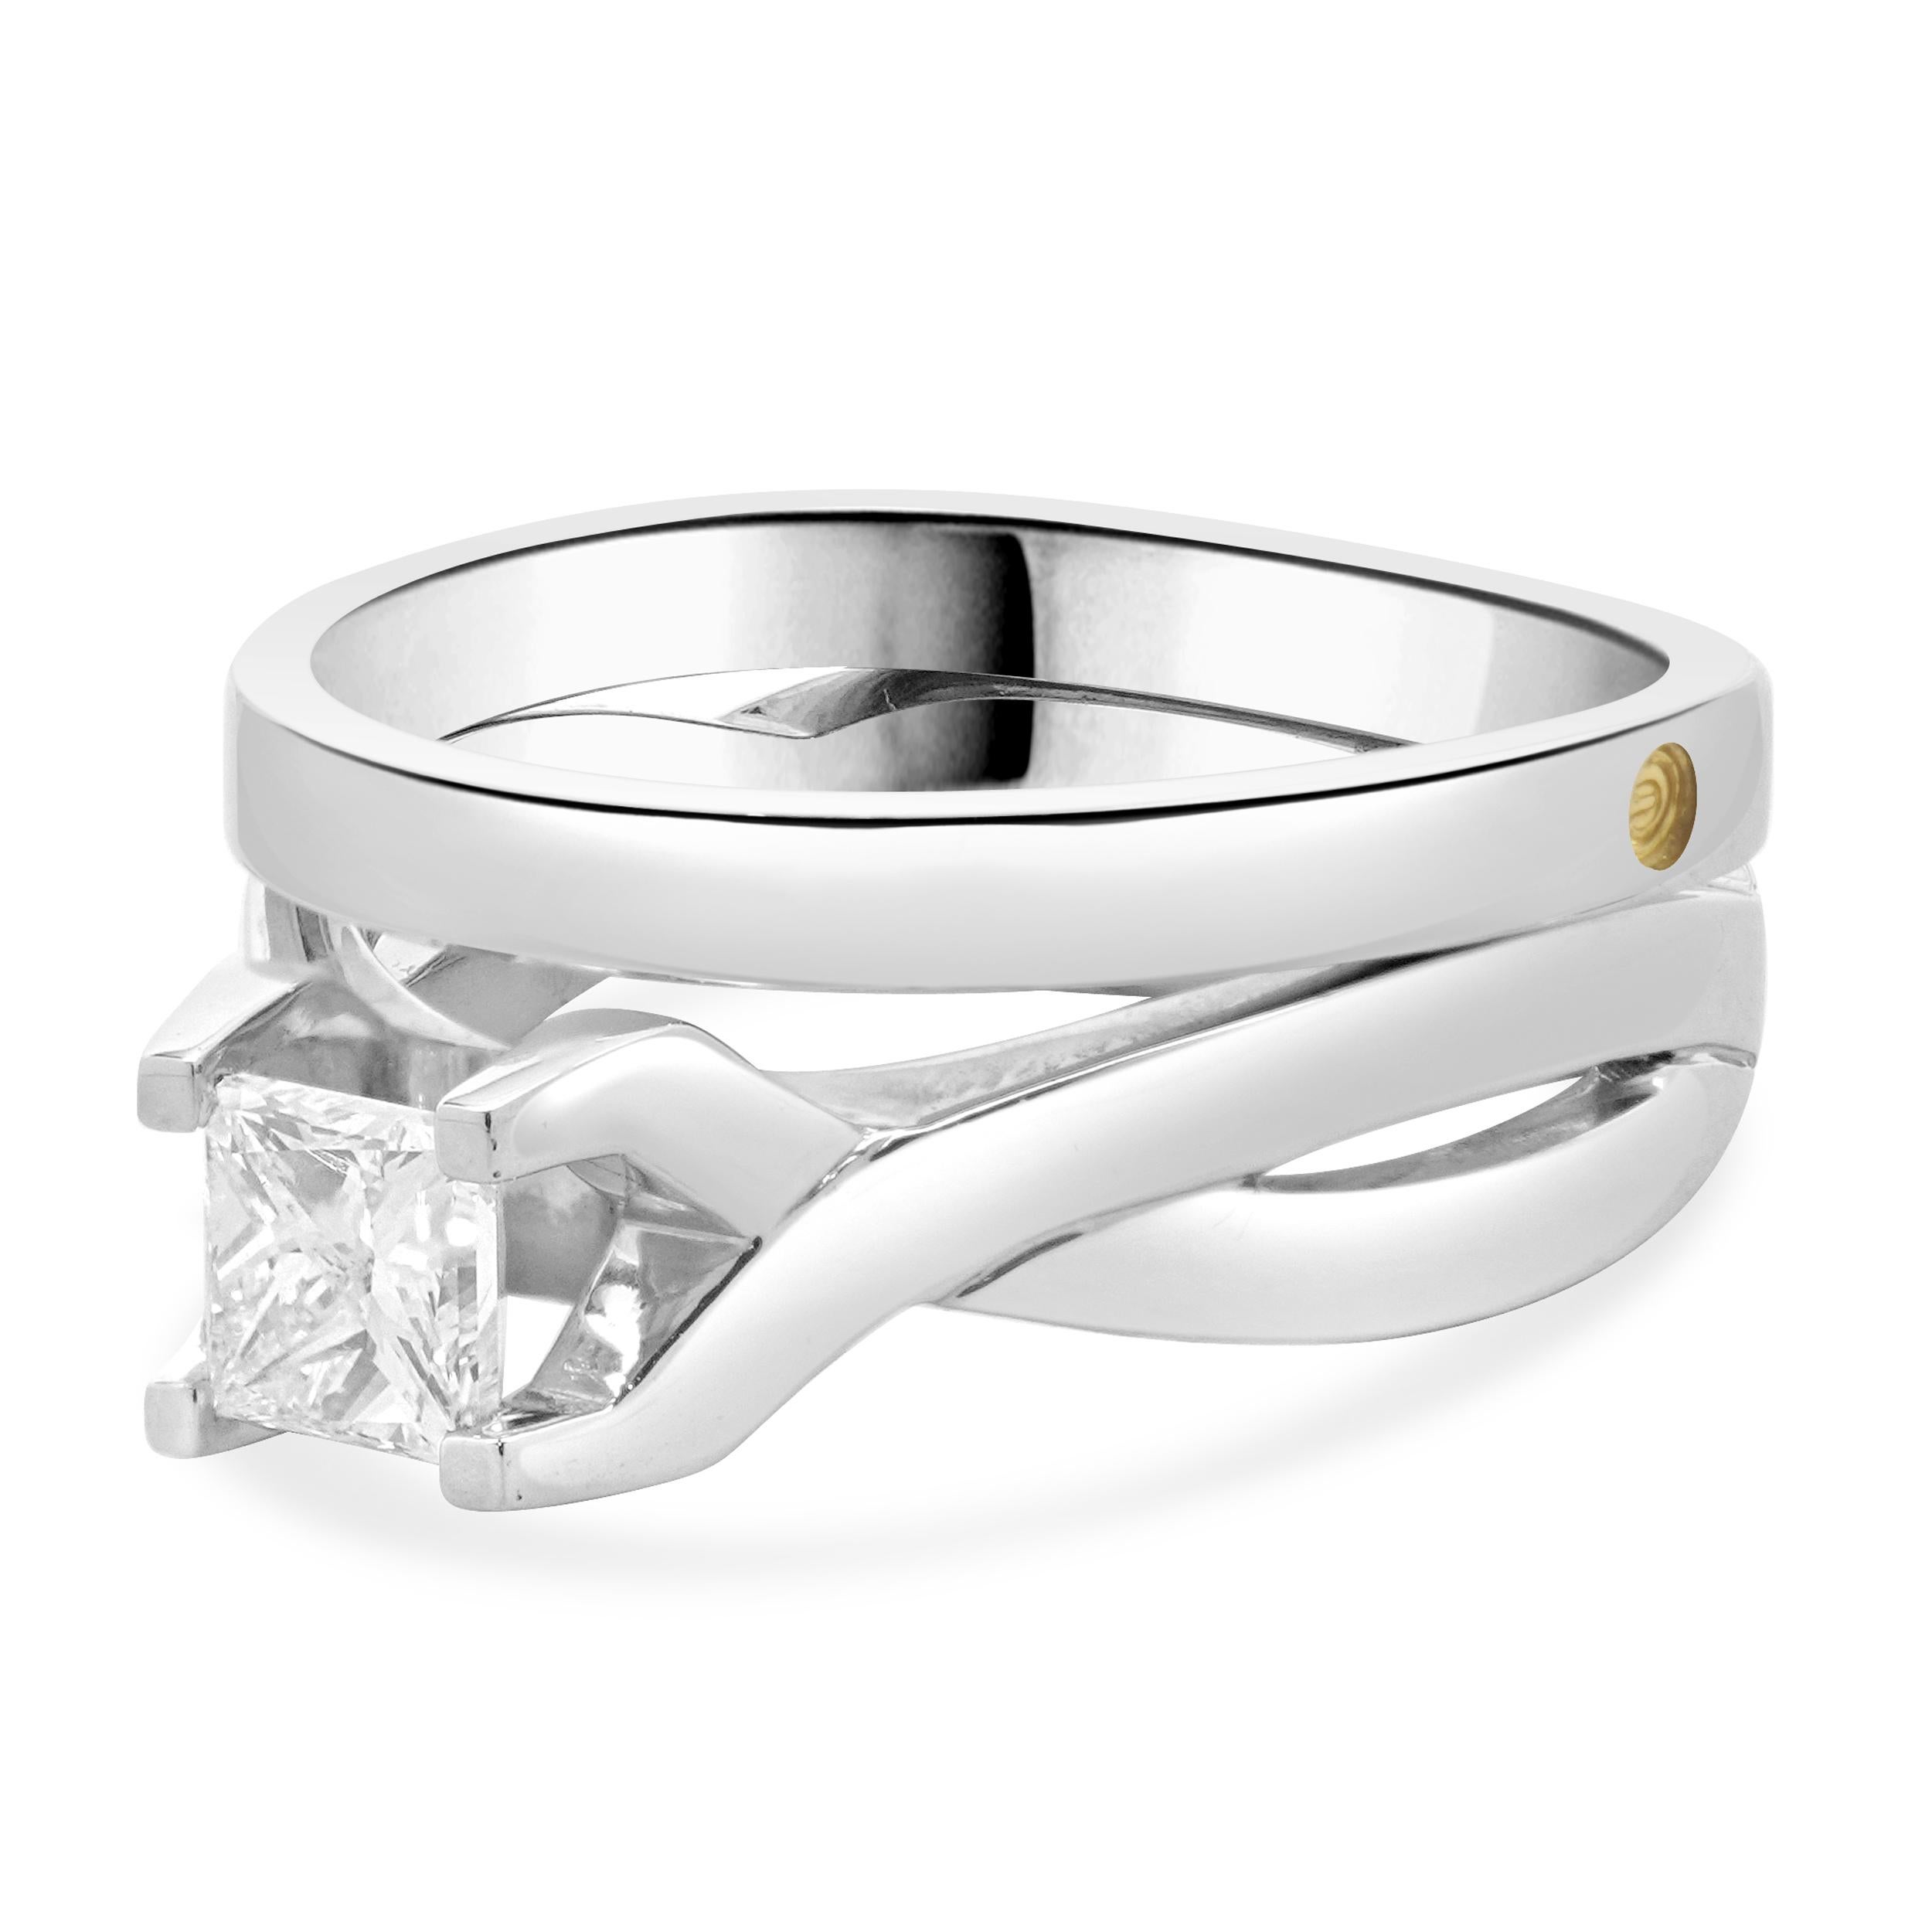 Designer: custom
Material: platinum
Diamond: 1 princess cut = 1.01ct
Color: G
Clarity: VS2
Dimensions: ring top measures 9mm wide
Ring Size: 9.25 (complimentary sizing available)
Weight: 21.38 grams